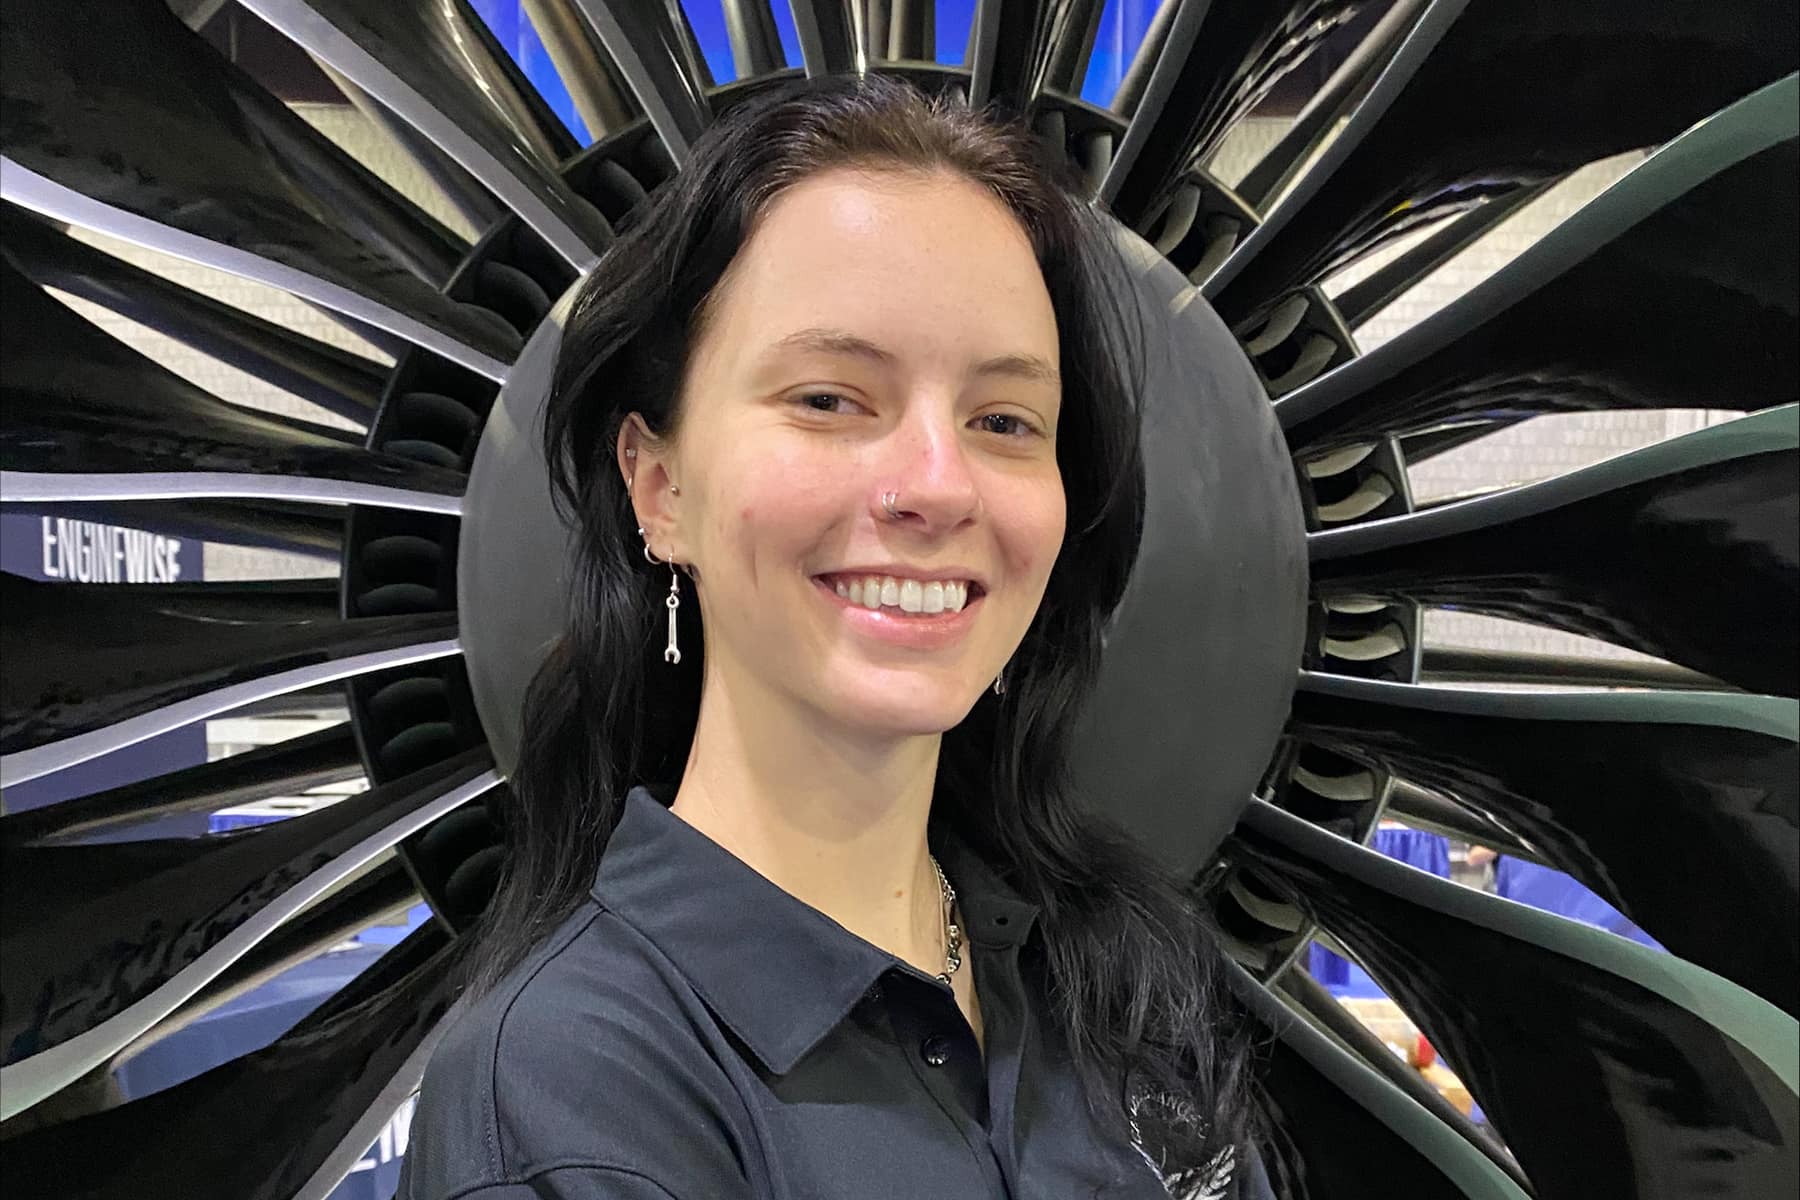 Shelby, a white woman with long dark hair, smiles in front of a large engine fan.